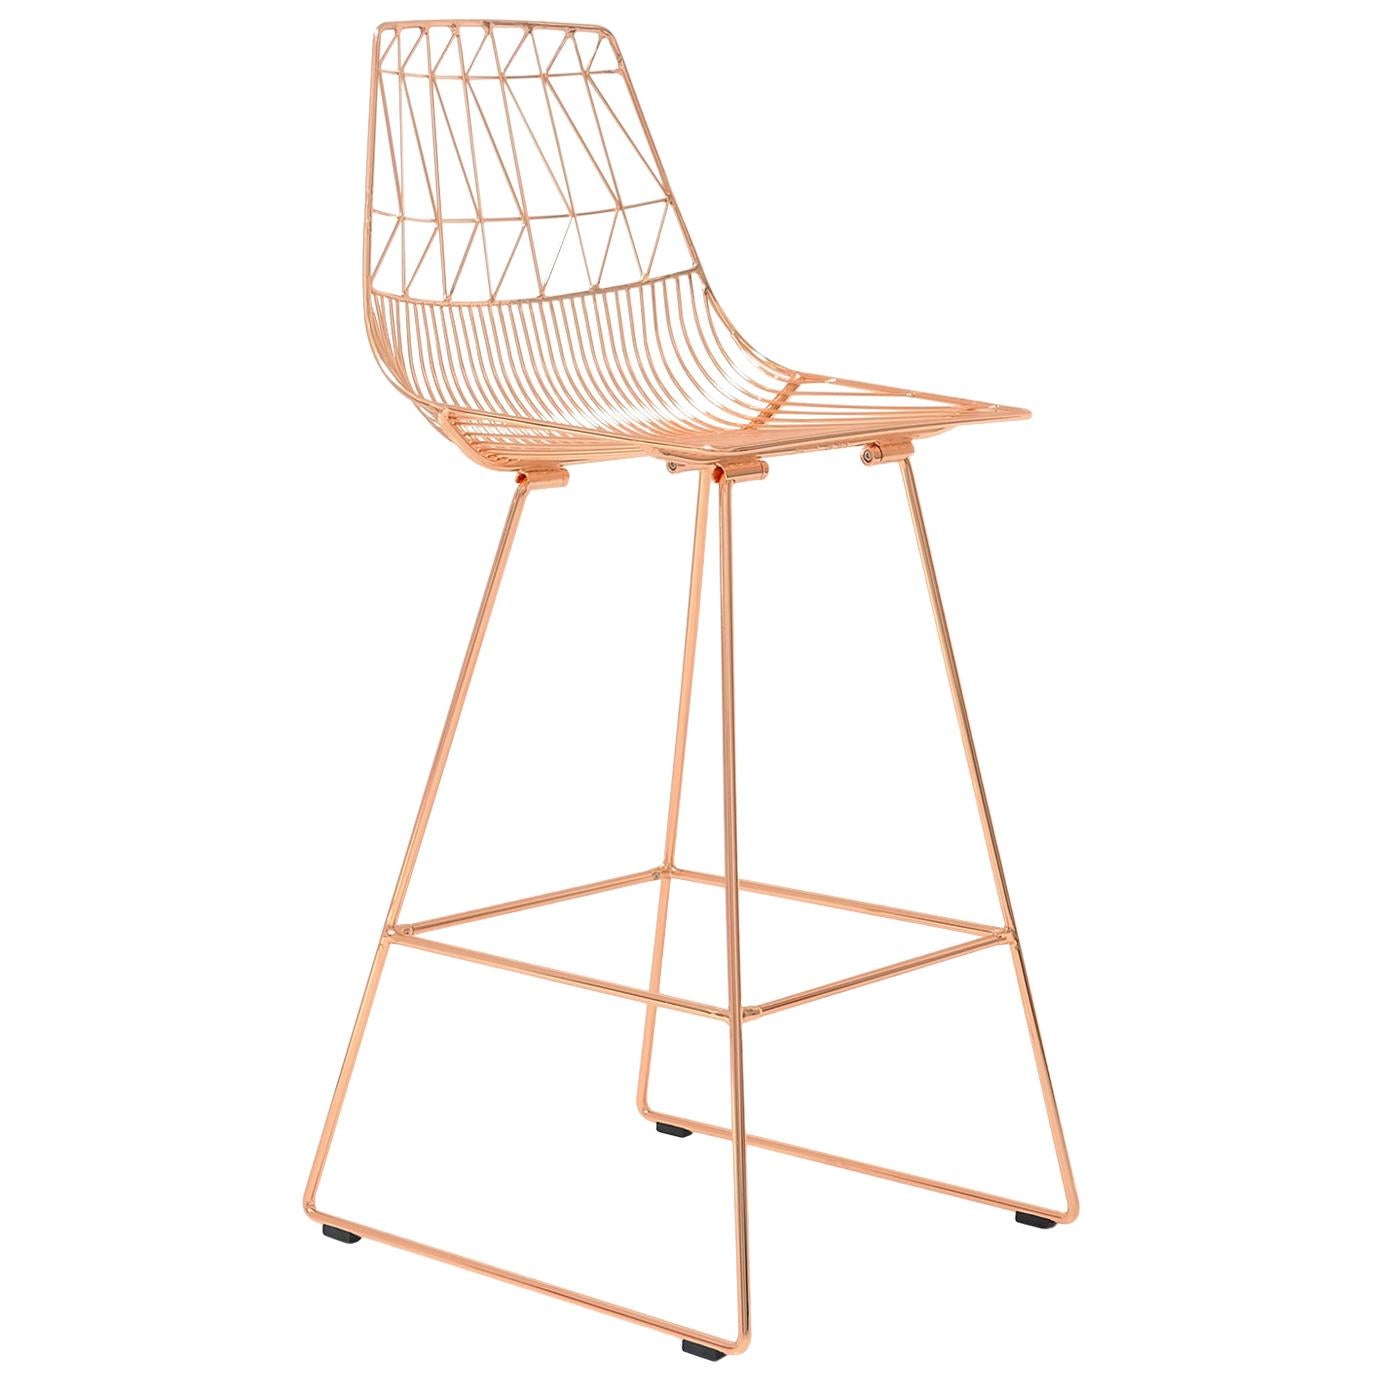 Mid-Century Modern, Minimalist Wire Bar Stool, in Copper by Bend Goods